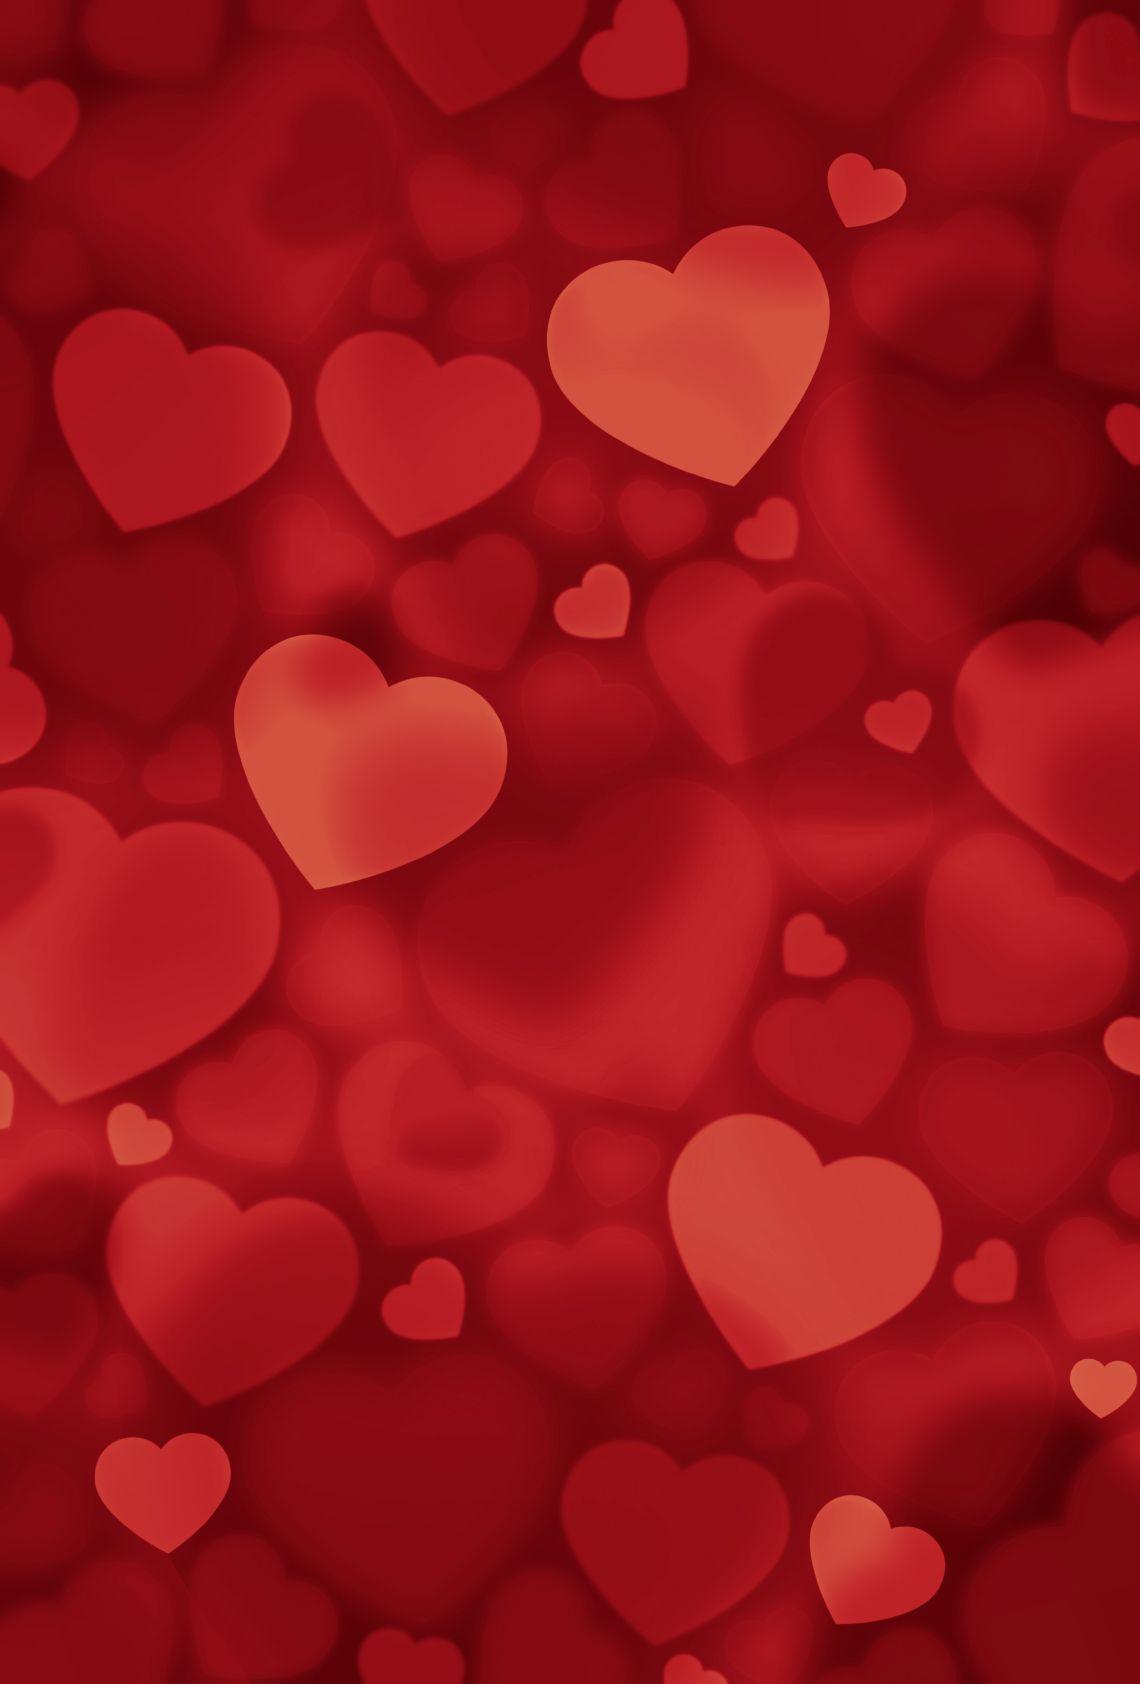 Red Love Background Images, HD Pictures and Wallpaper For Free Download